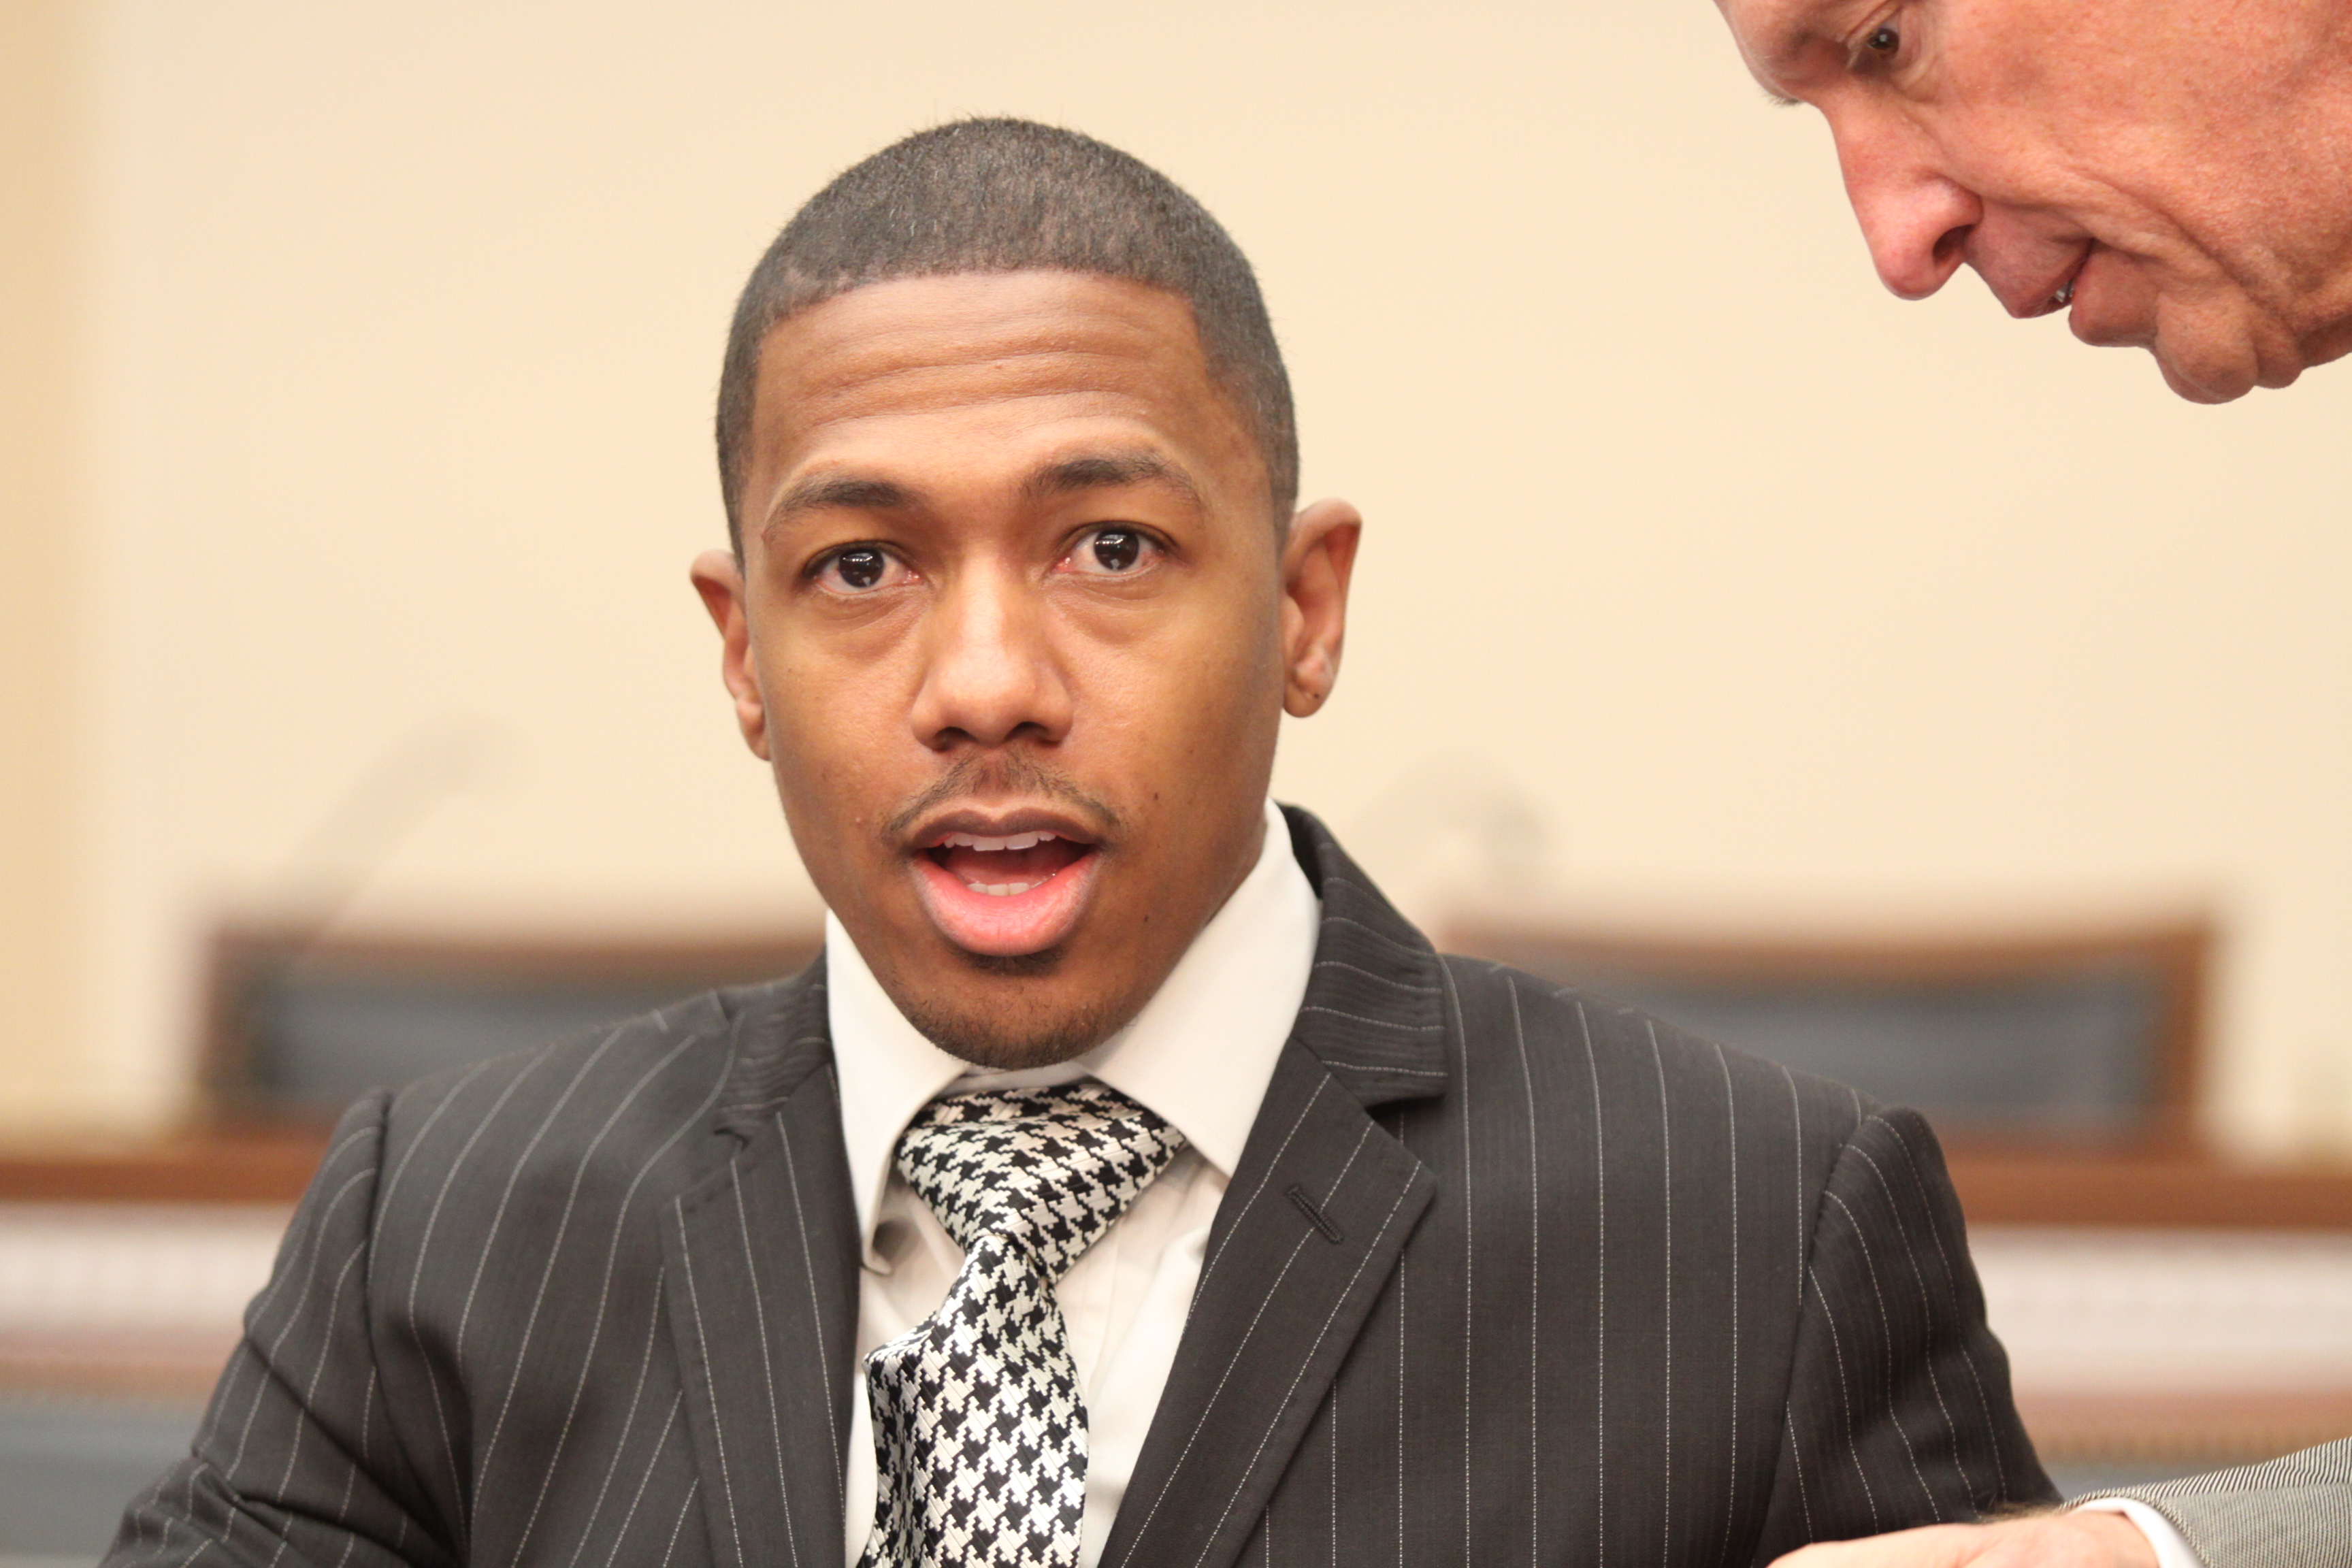 More Pictures Of Nick Cannon. 